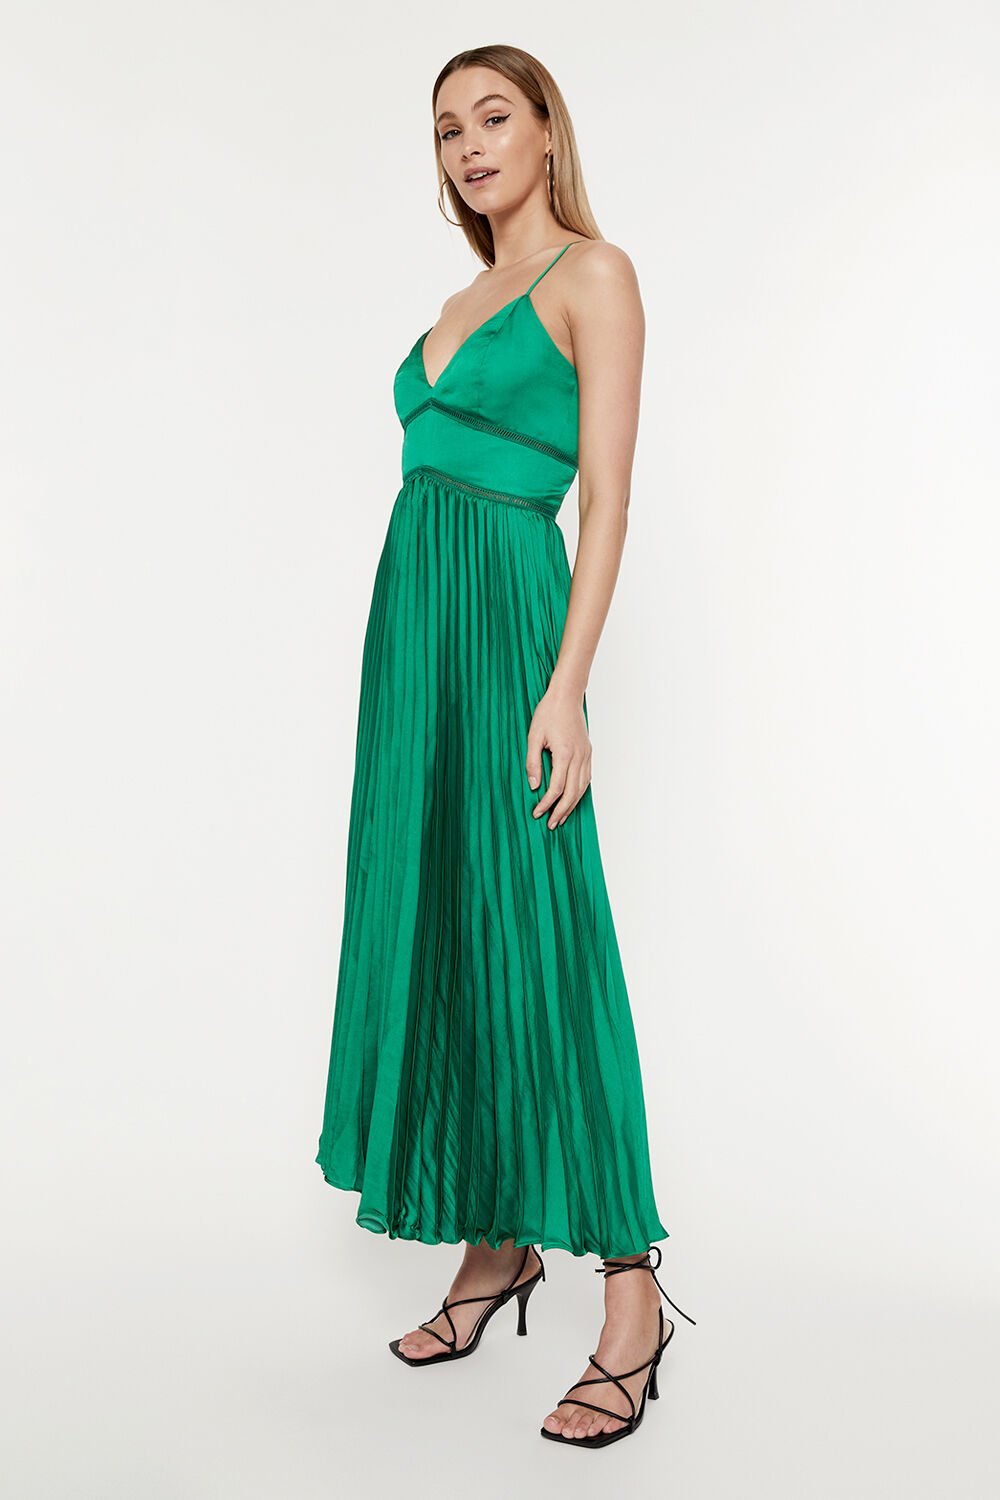 MARY PLEATED DRESS in colour CLASSIC GREEN